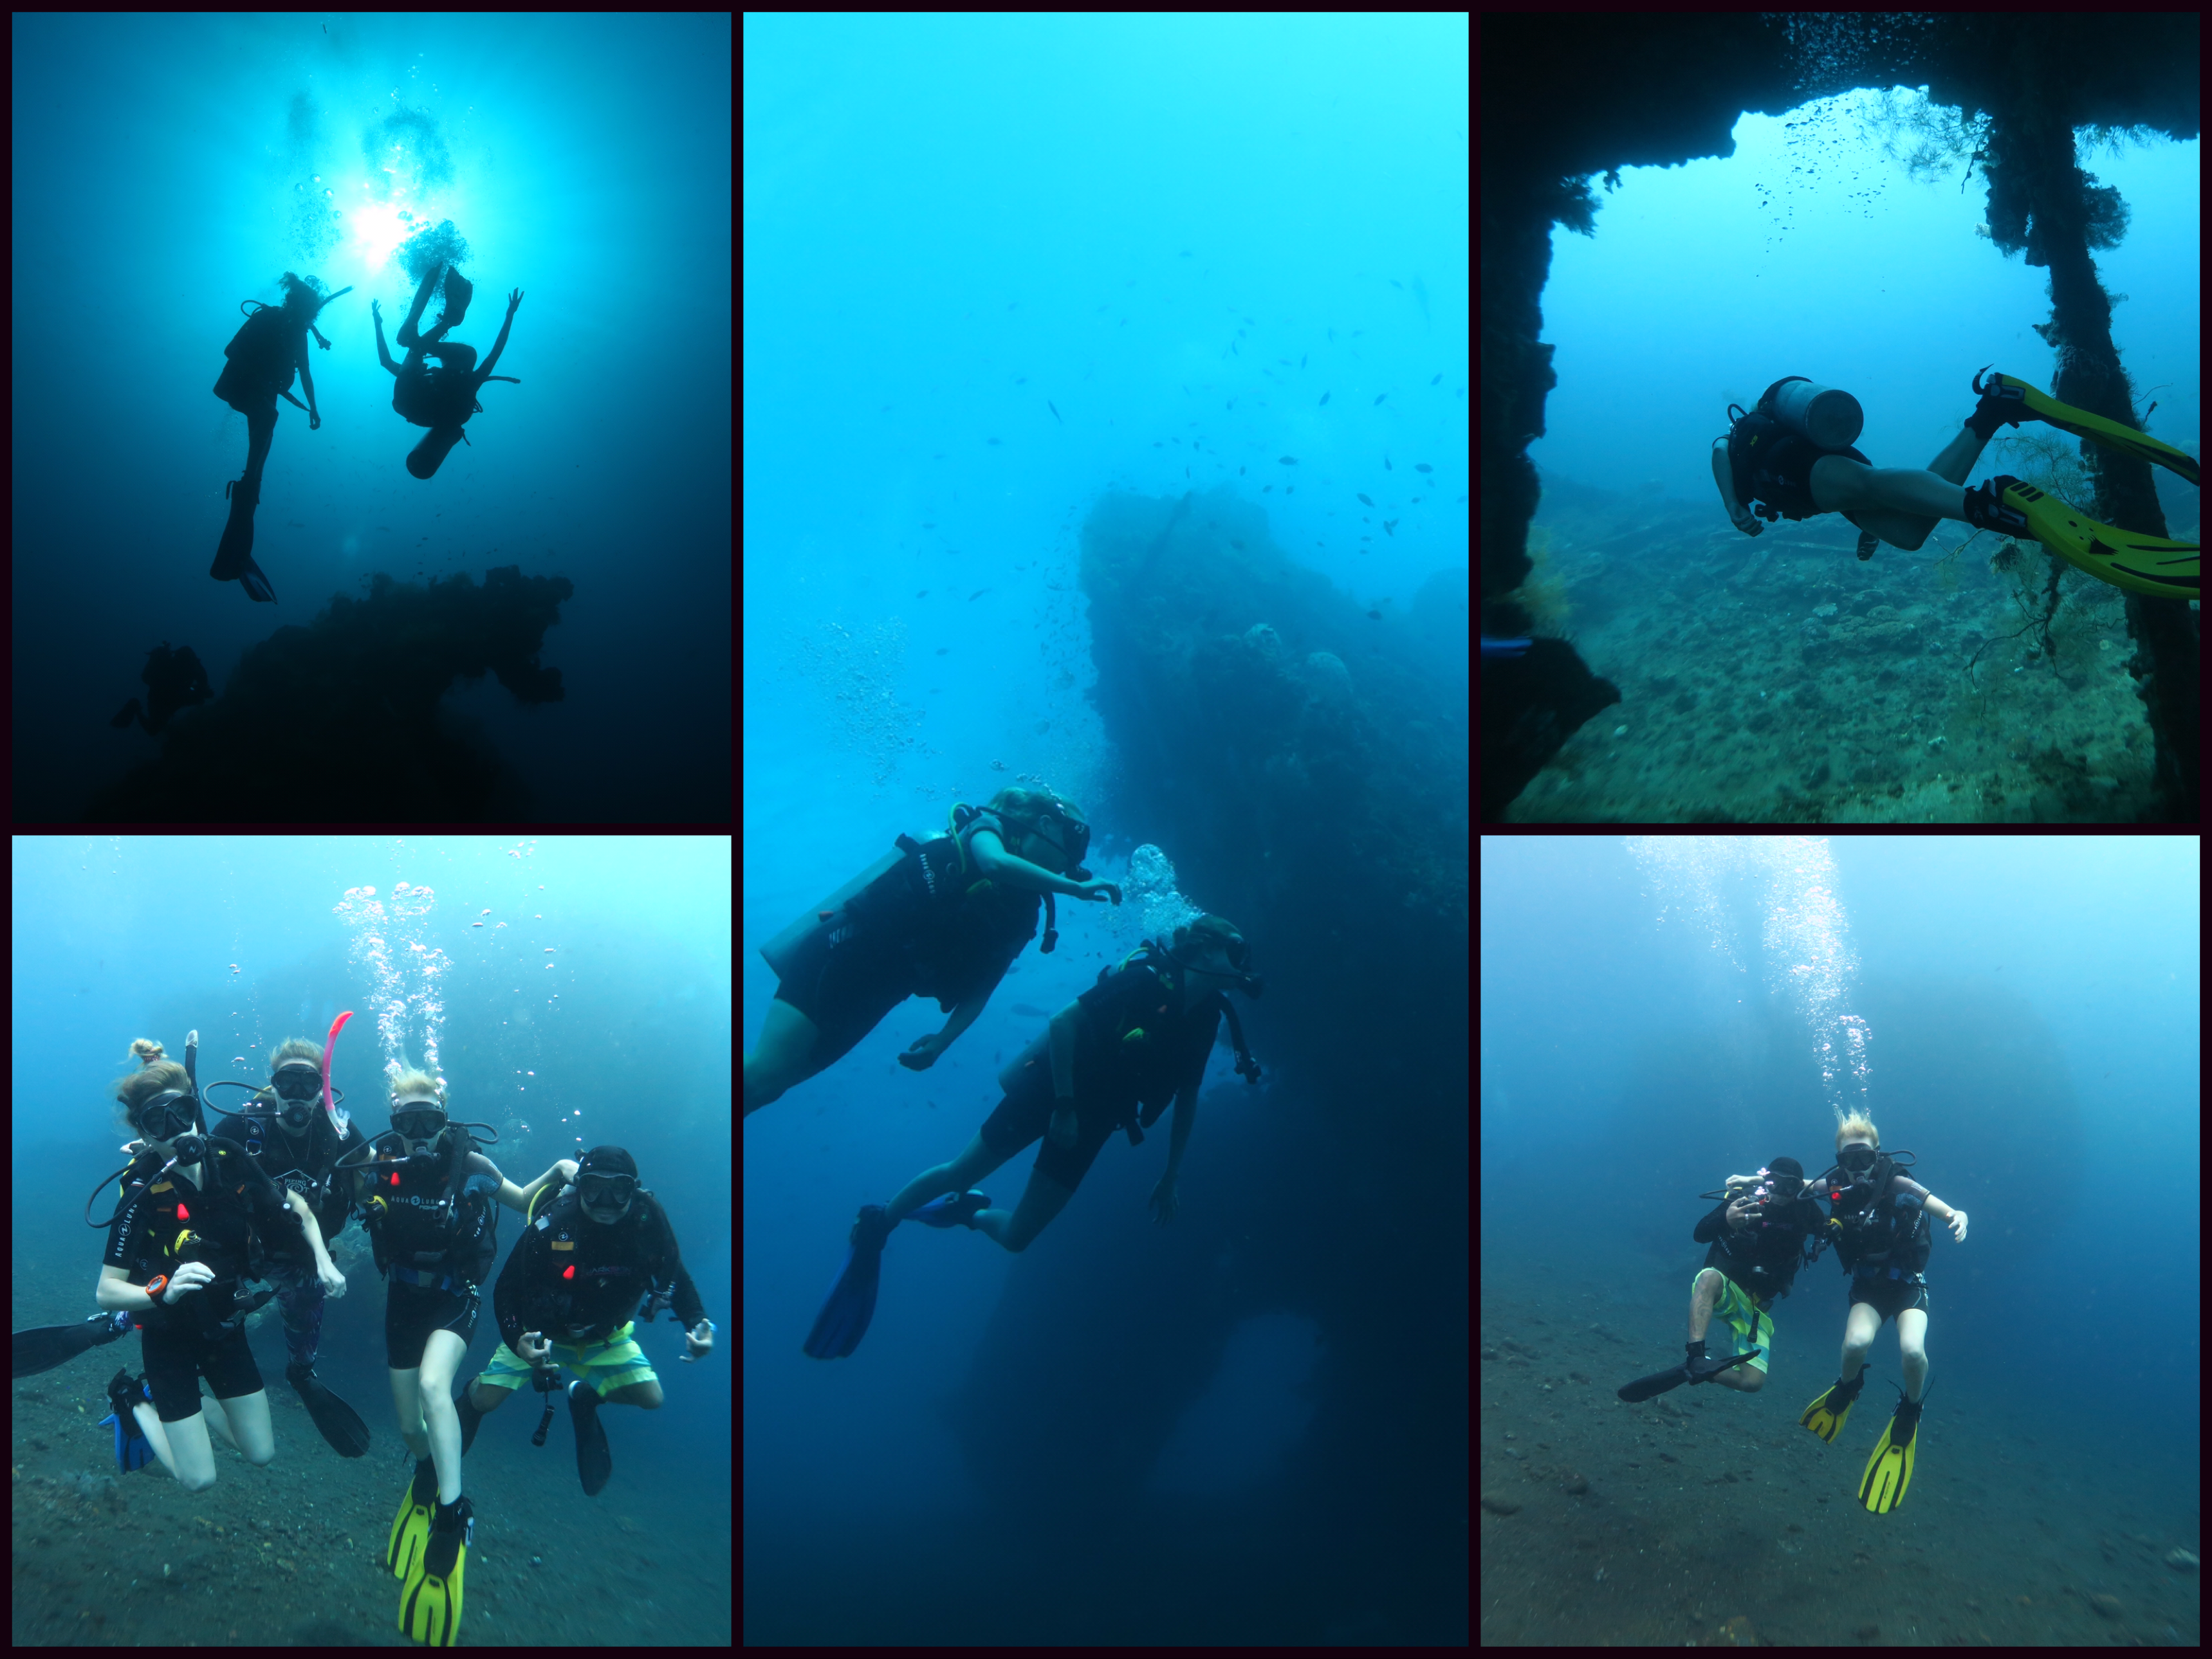 Compilation of photos from Sarah's Dive in Tulamben